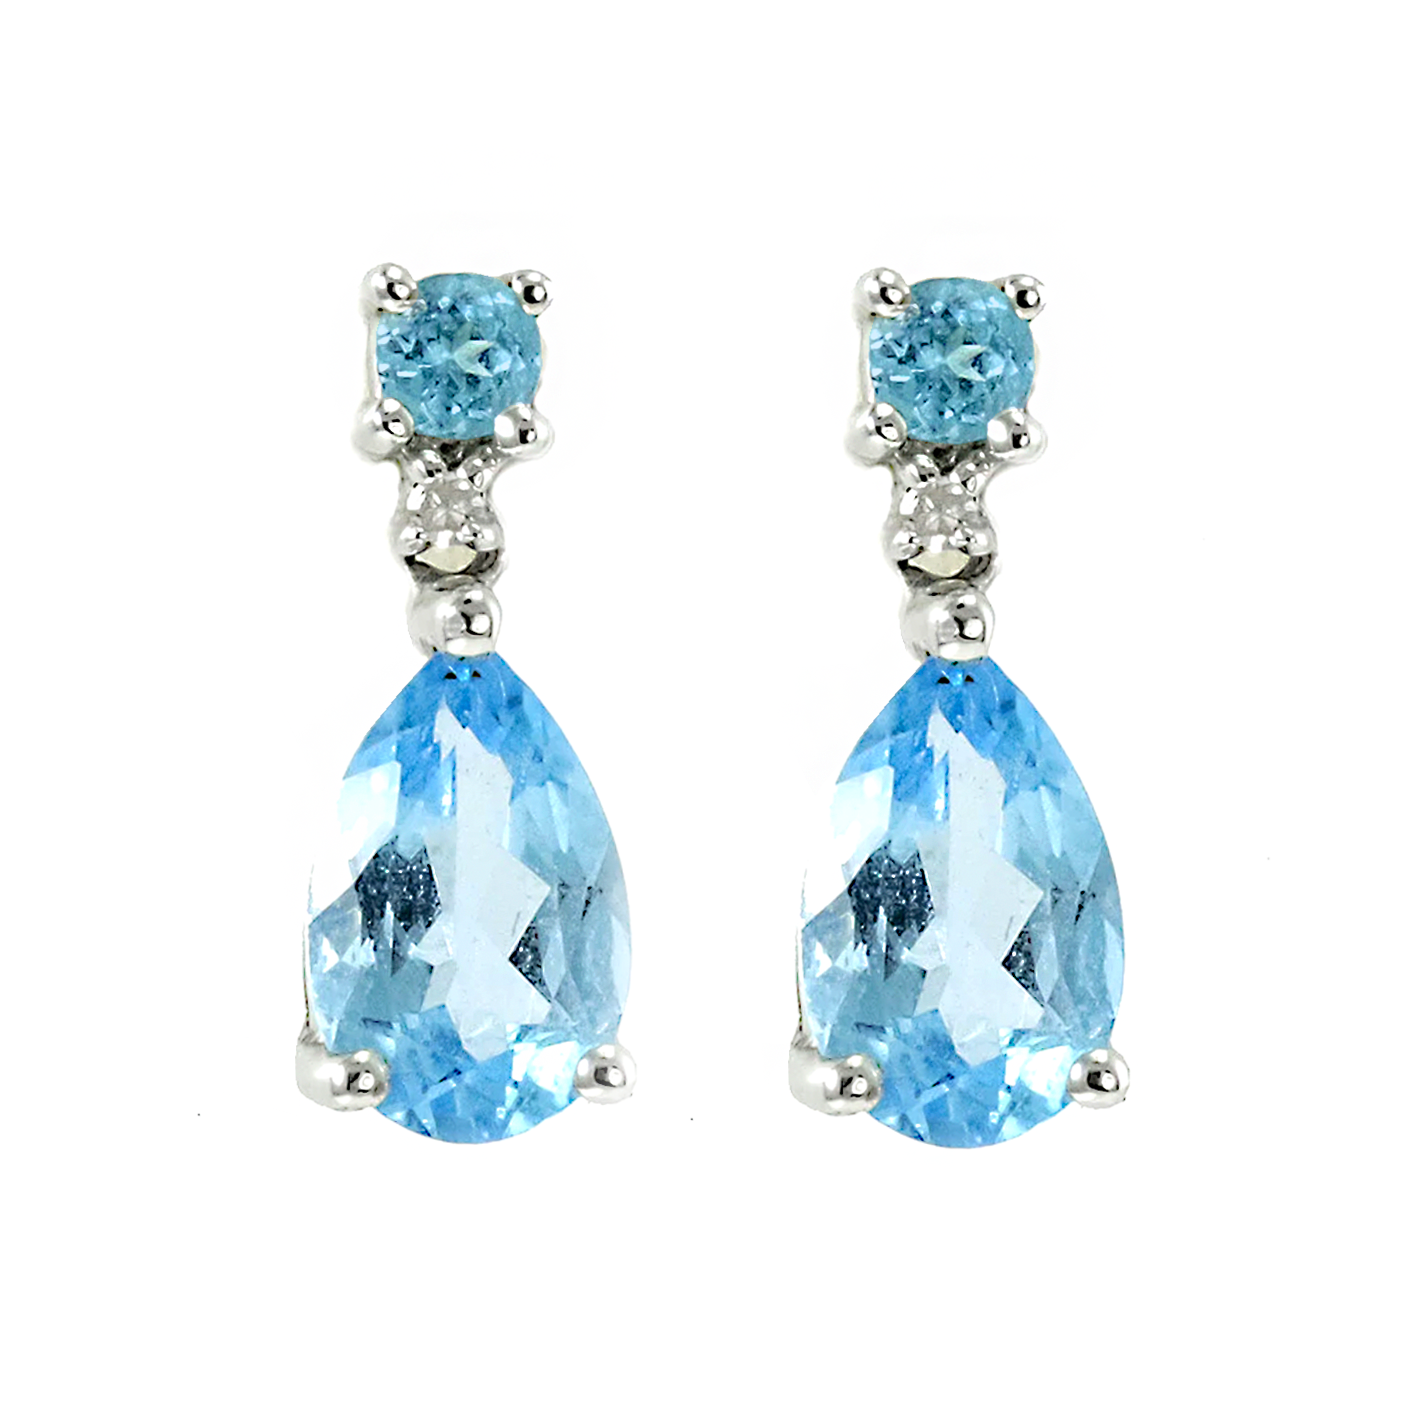 14k white gold pear shape and round blue topaz and diamond earrings.